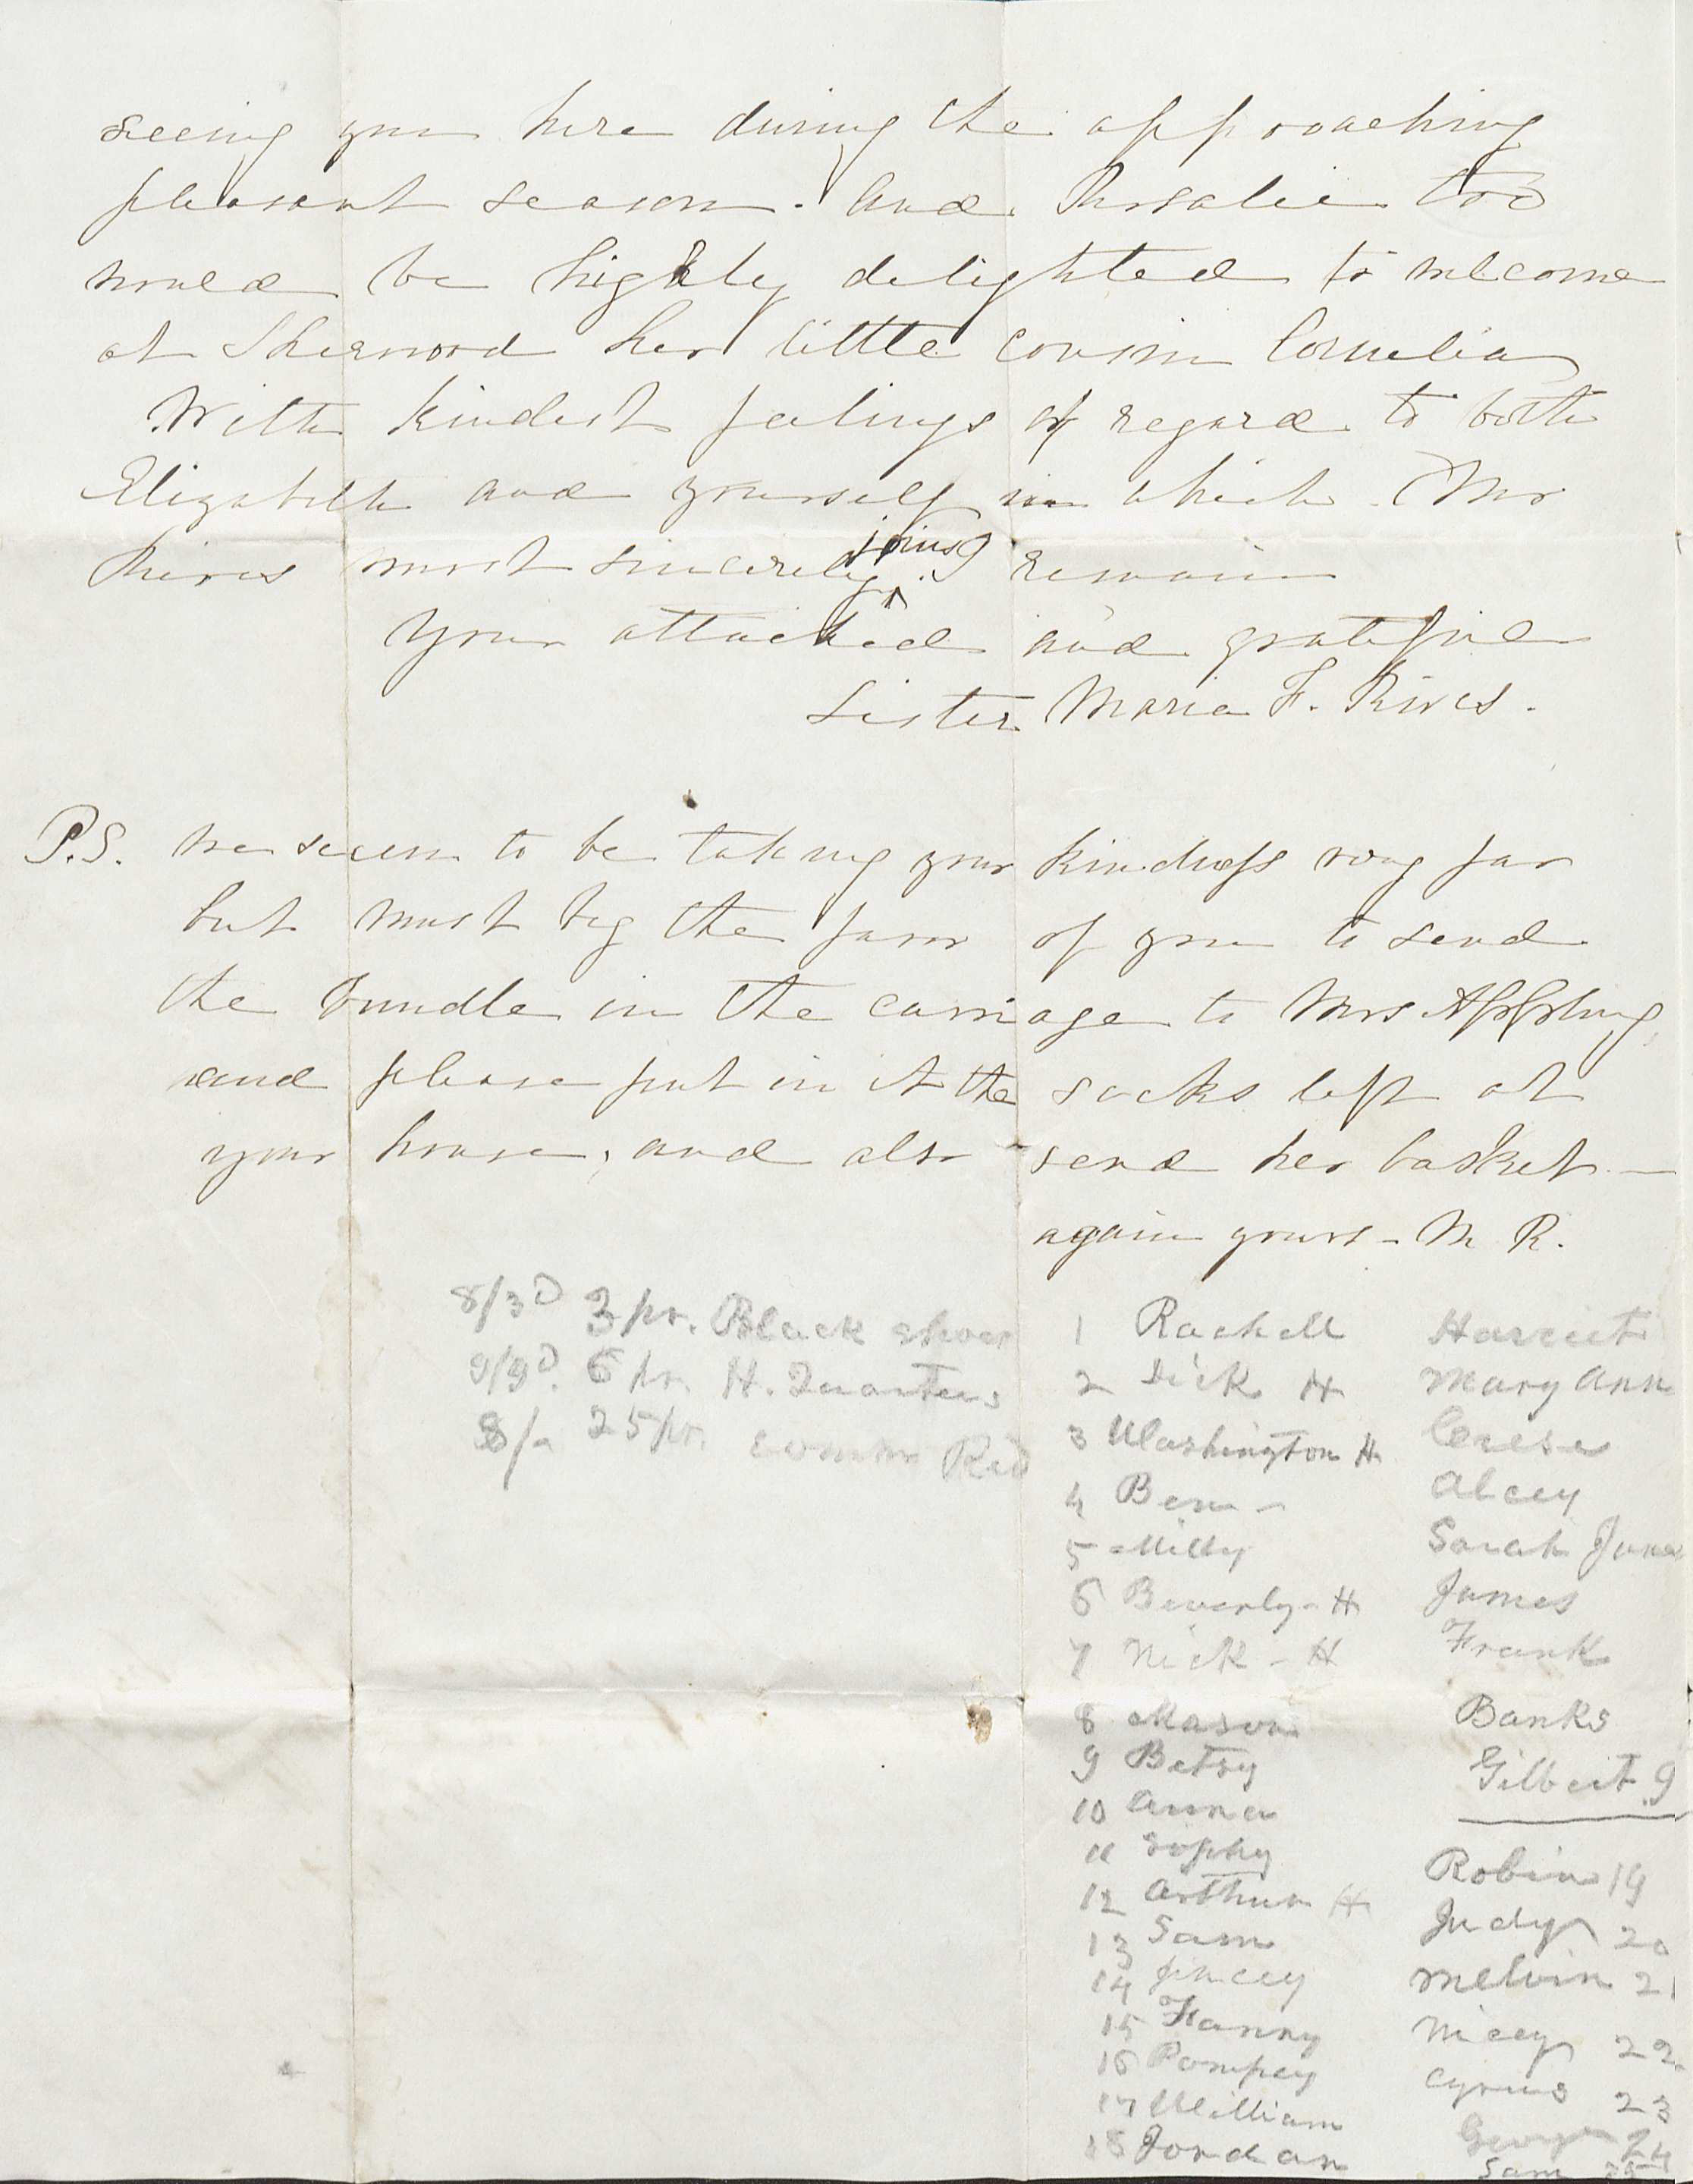 March 24, 1851 letter to Robert Rives Jr.  from his sister- in- law, Maria Rives.  In the letter Maria writes about a recent visit to Rives and his family at their home called Oakland,  and the declining health of his brother George.  The contents of the letter has no connection to the list found at the bottom of page two. Rives uses the bottom of the page as scratch paper to list the names of 34 of his slaves and supplies purchased for them. The number 22 on the list is my great-great grandmother, Nicey Ann Coles. (Image by Regina Rush)